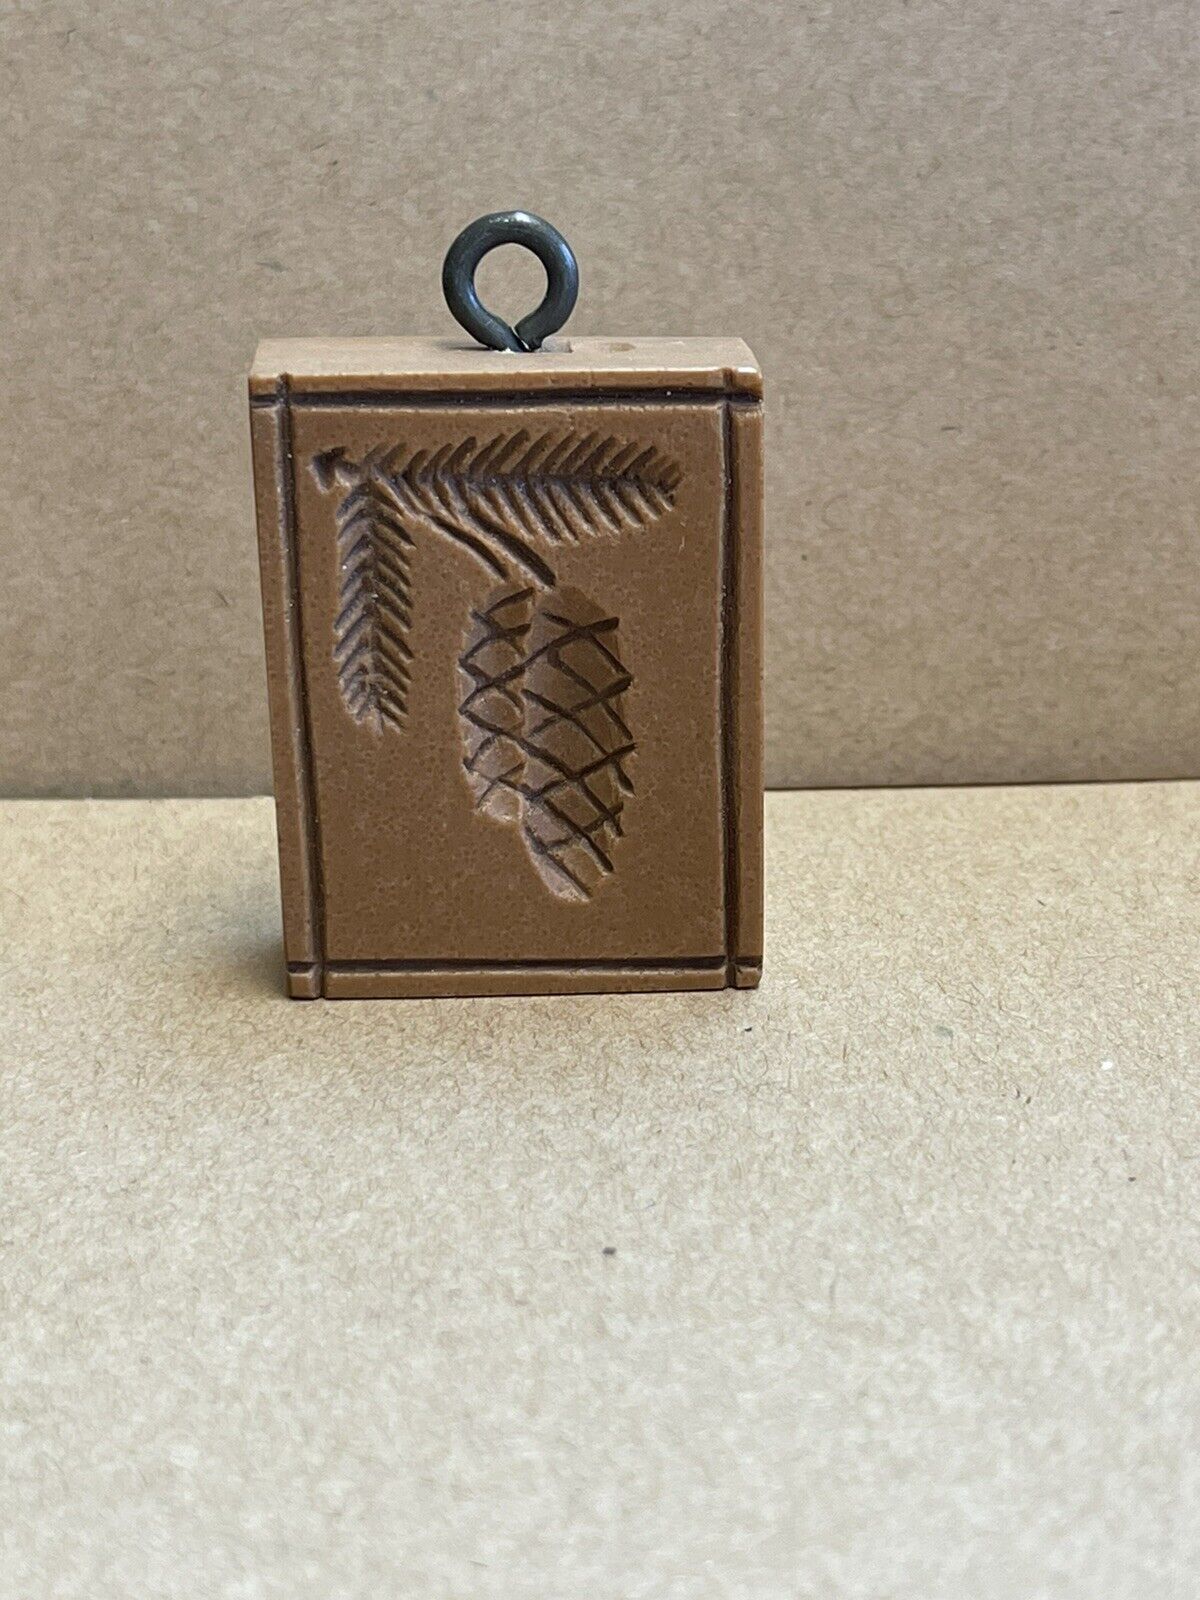 Pine Cone and Branch Springerle Cookie Mold Stamp Anis Paradies 